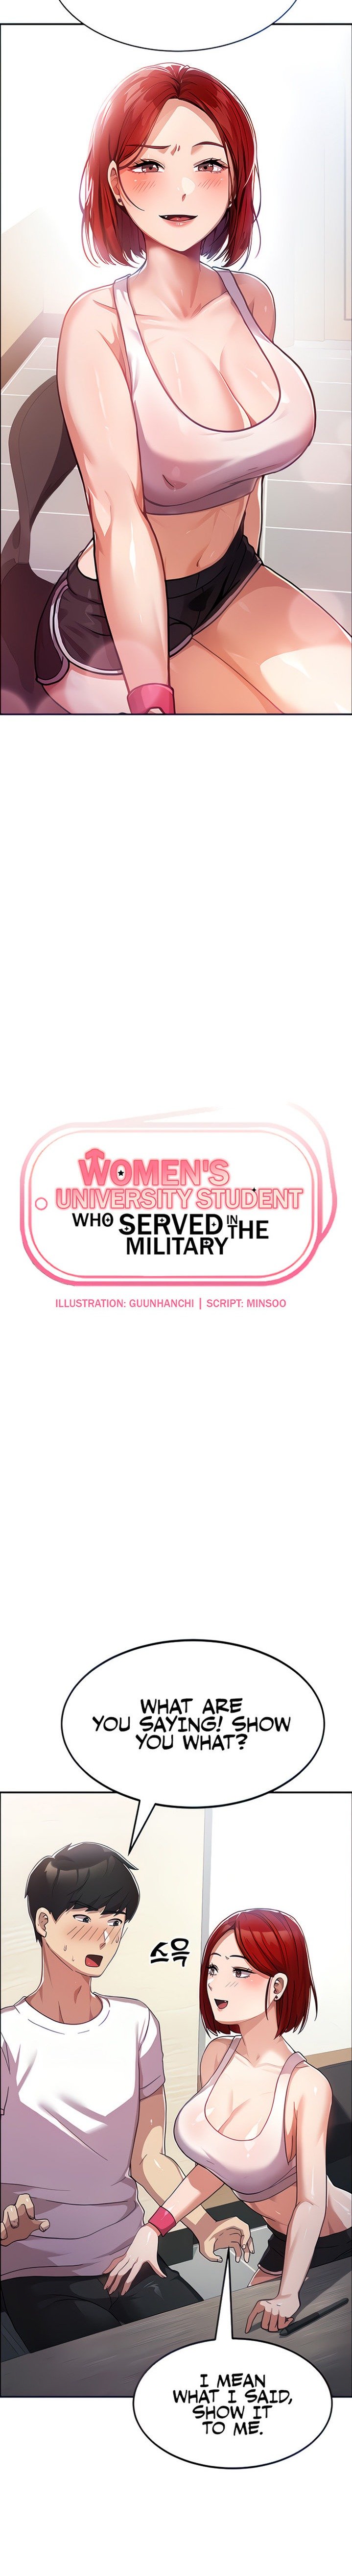 womens-university-student-who-served-in-the-military-chap-2-1